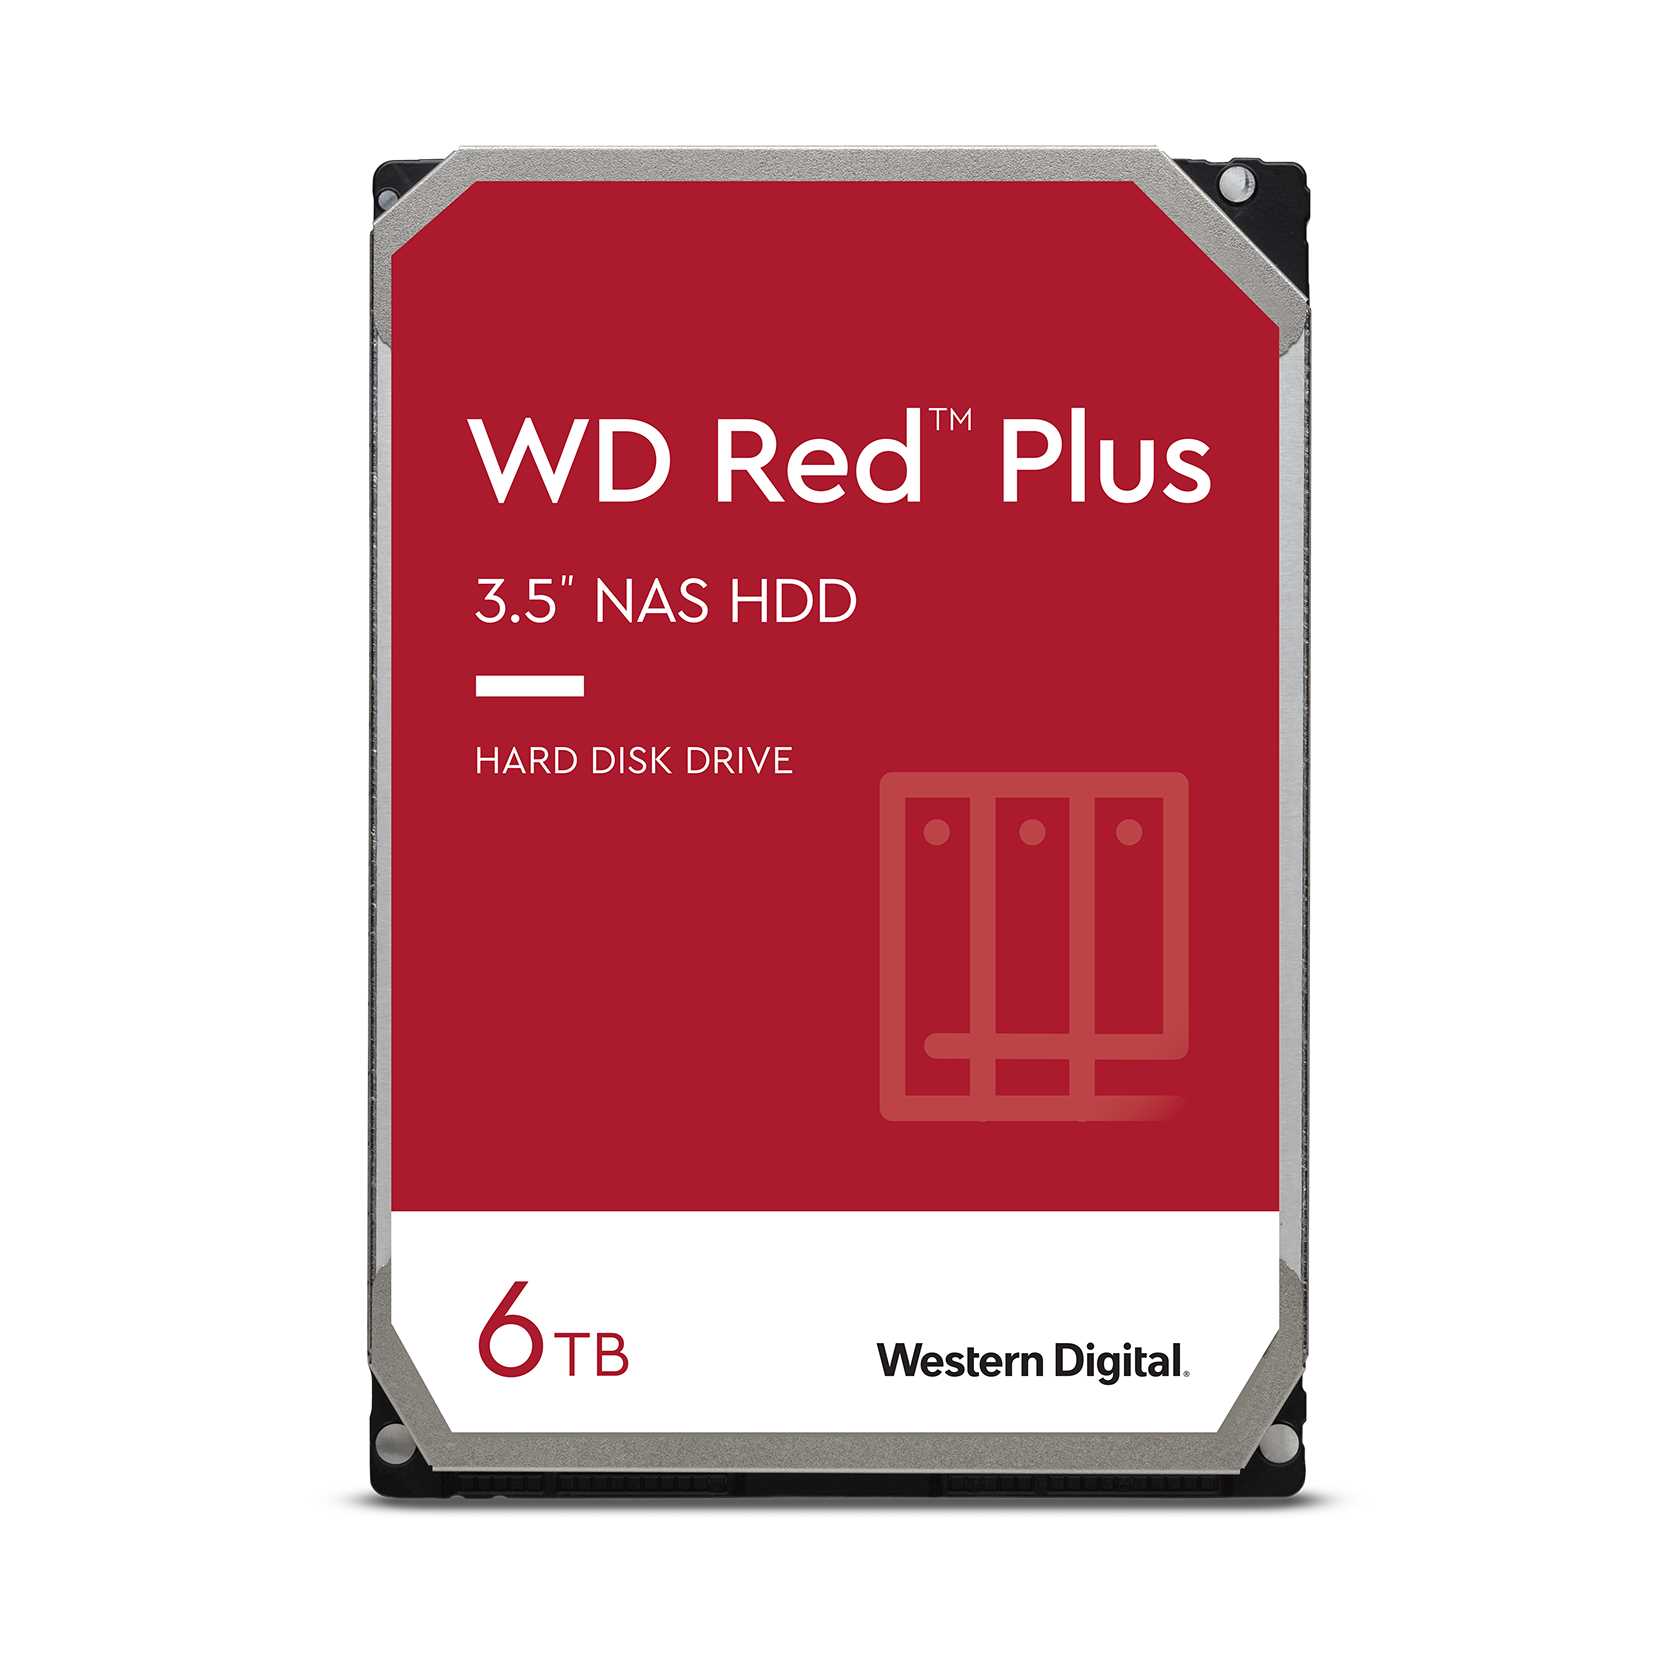 WD RED PLUS NAS WD60EFPX 6TB SATAIII/600 256MB cache 180MB/s CMR0 